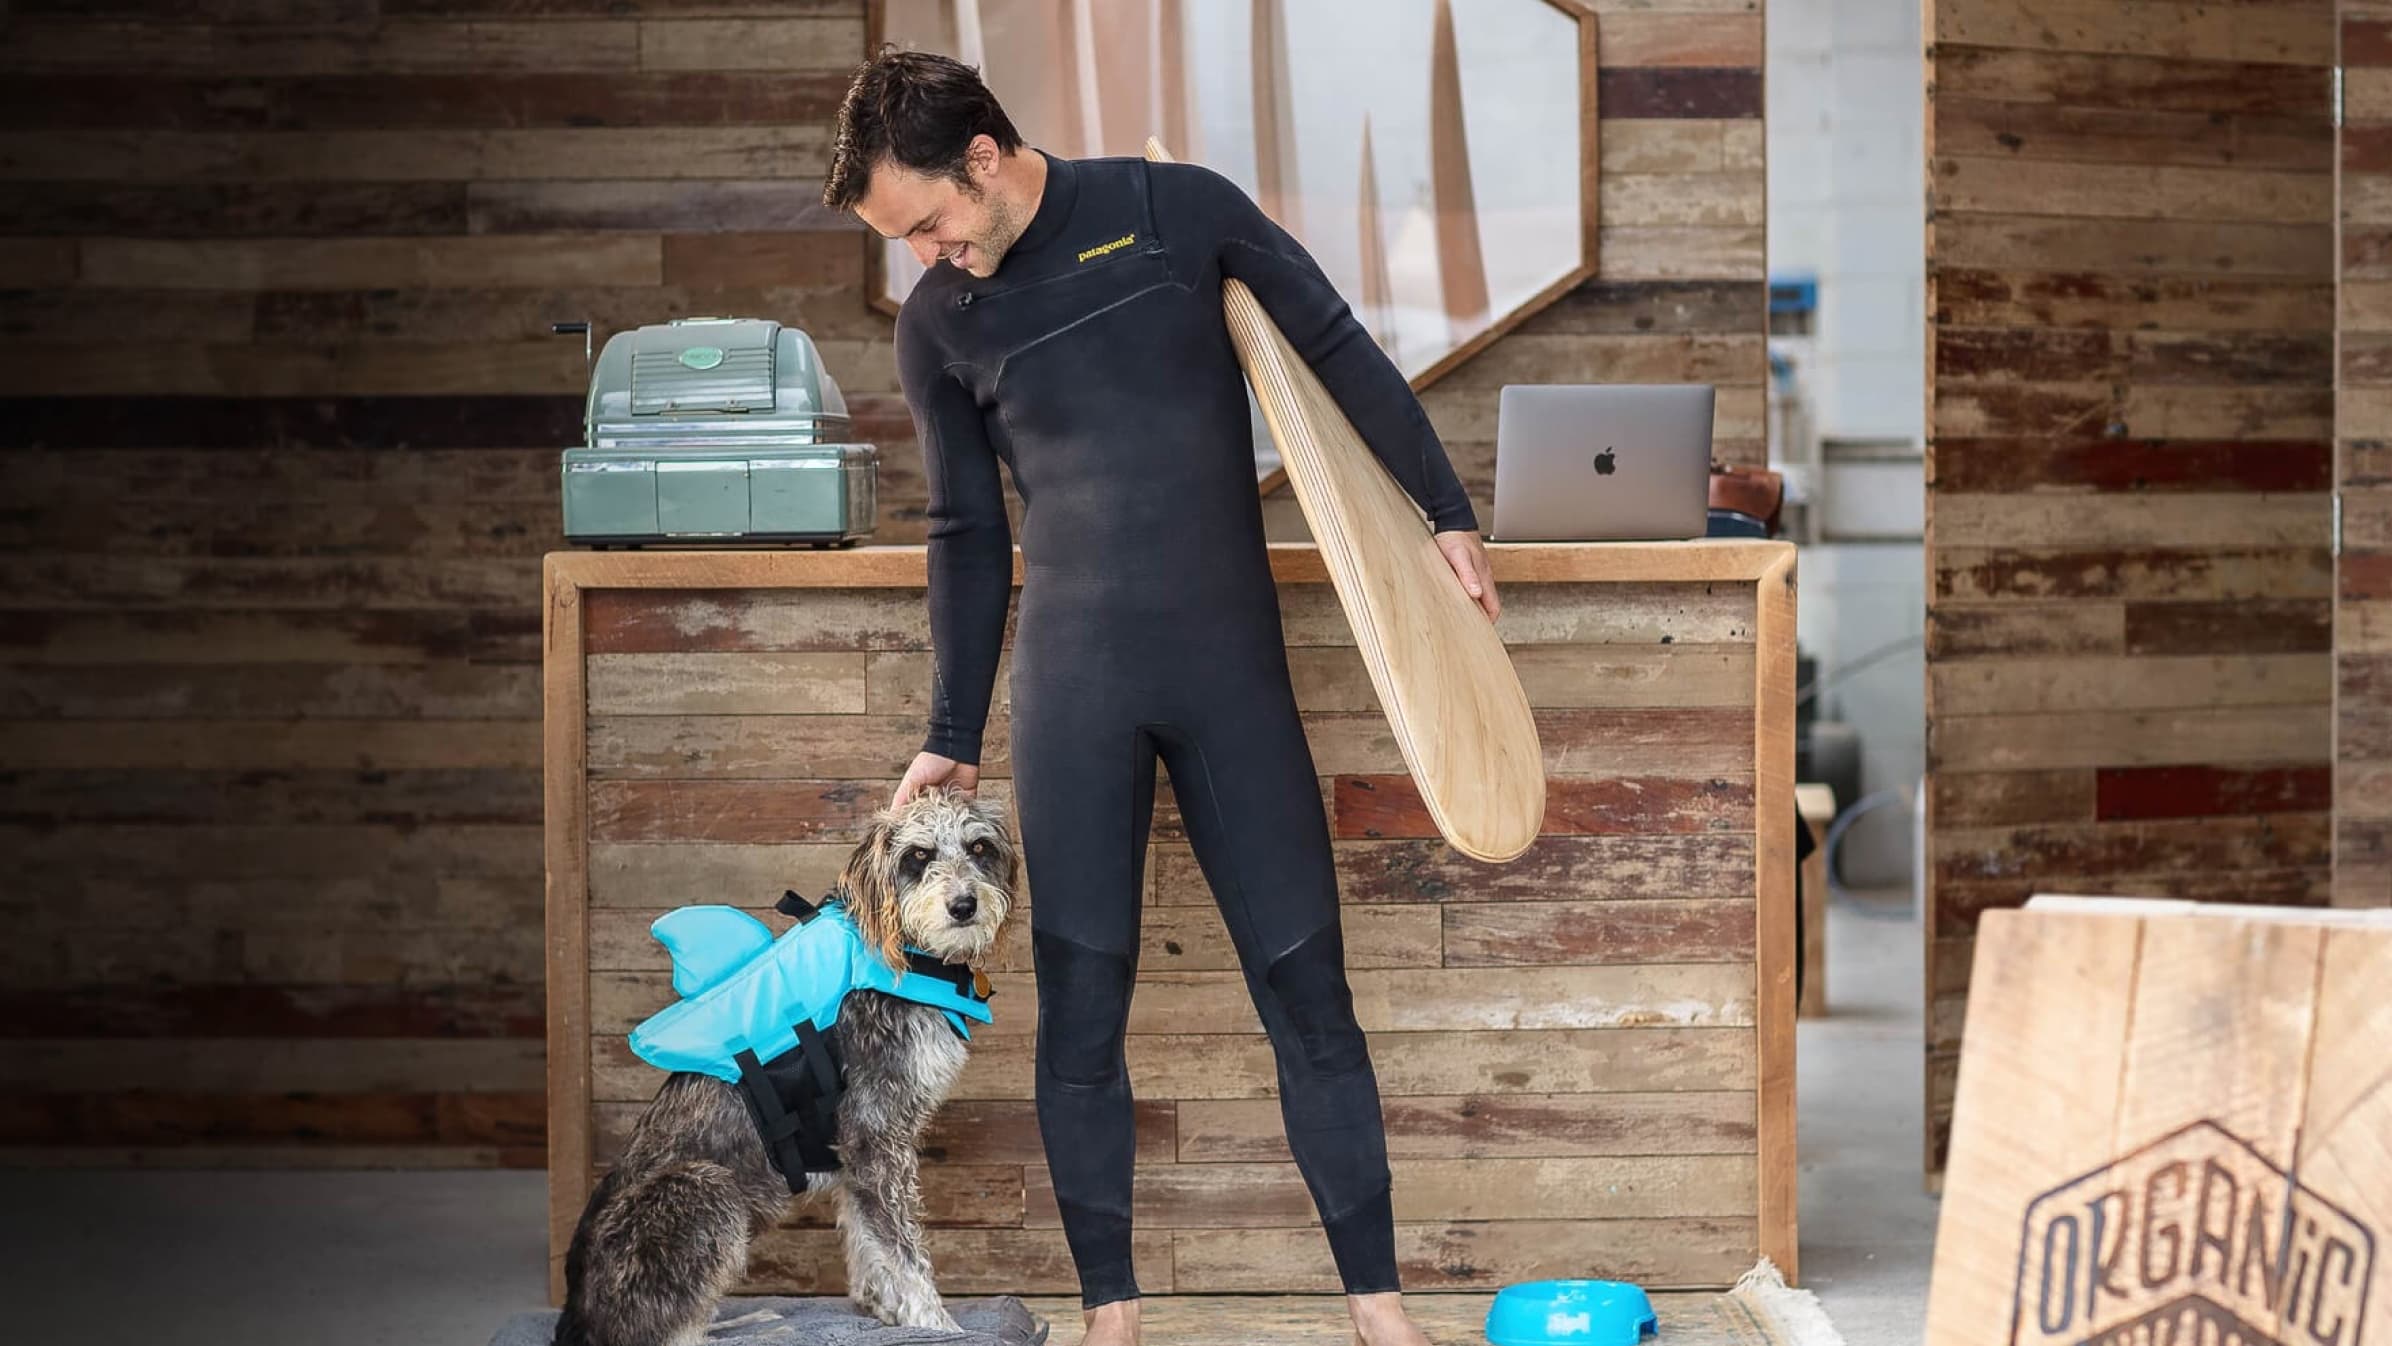 Jack Candlish, founder of Verdure Surf, wearing a wetsuit and holding a surfboard next to a dog wearing a swimming vest.